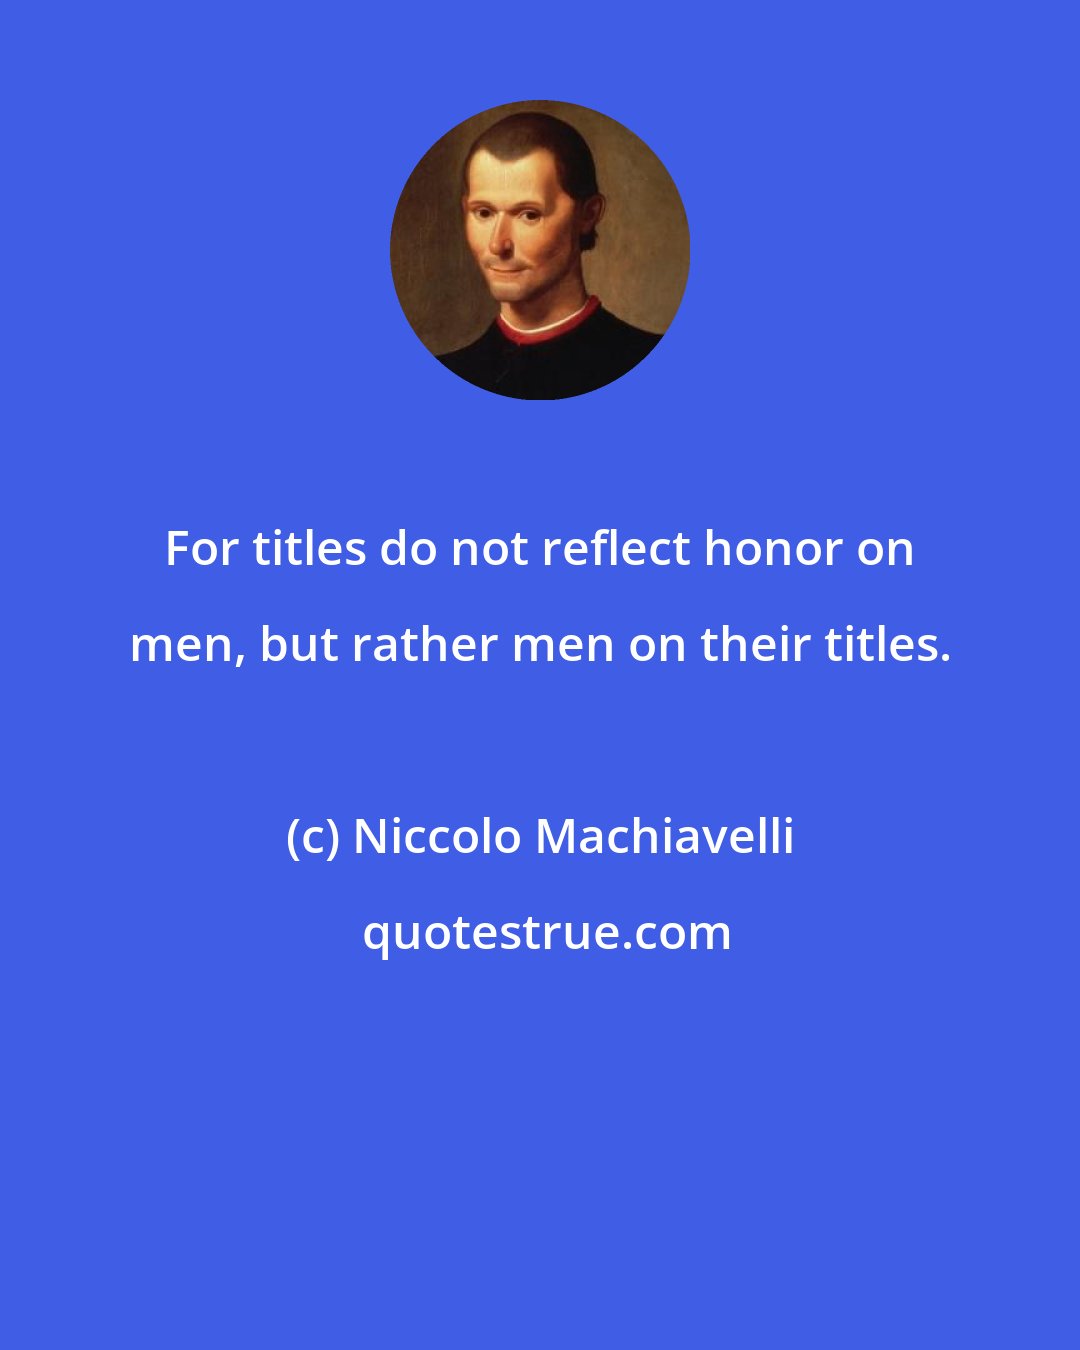 Niccolo Machiavelli: For titles do not reflect honor on men, but rather men on their titles.